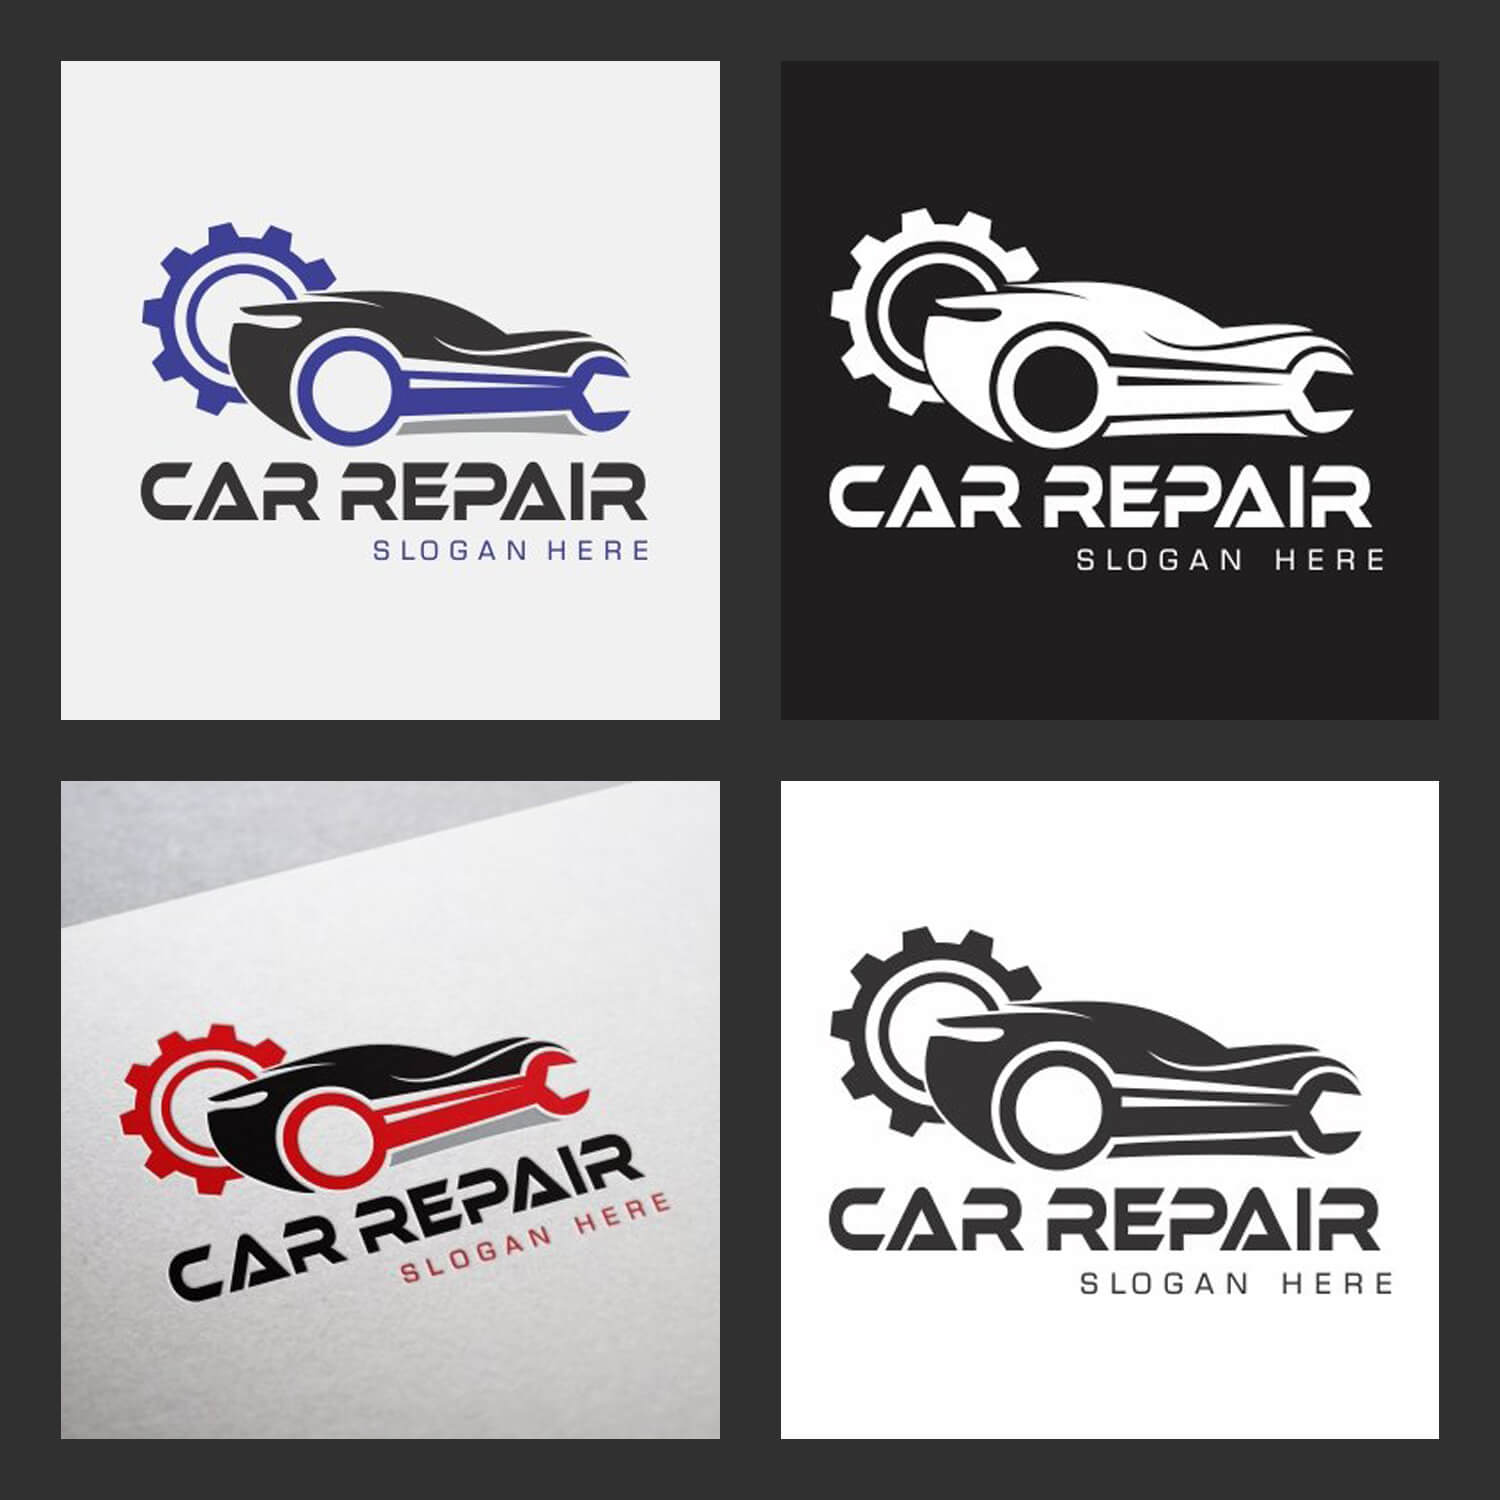 Car service station logo on white, black and gray backgrounds in square patterns.